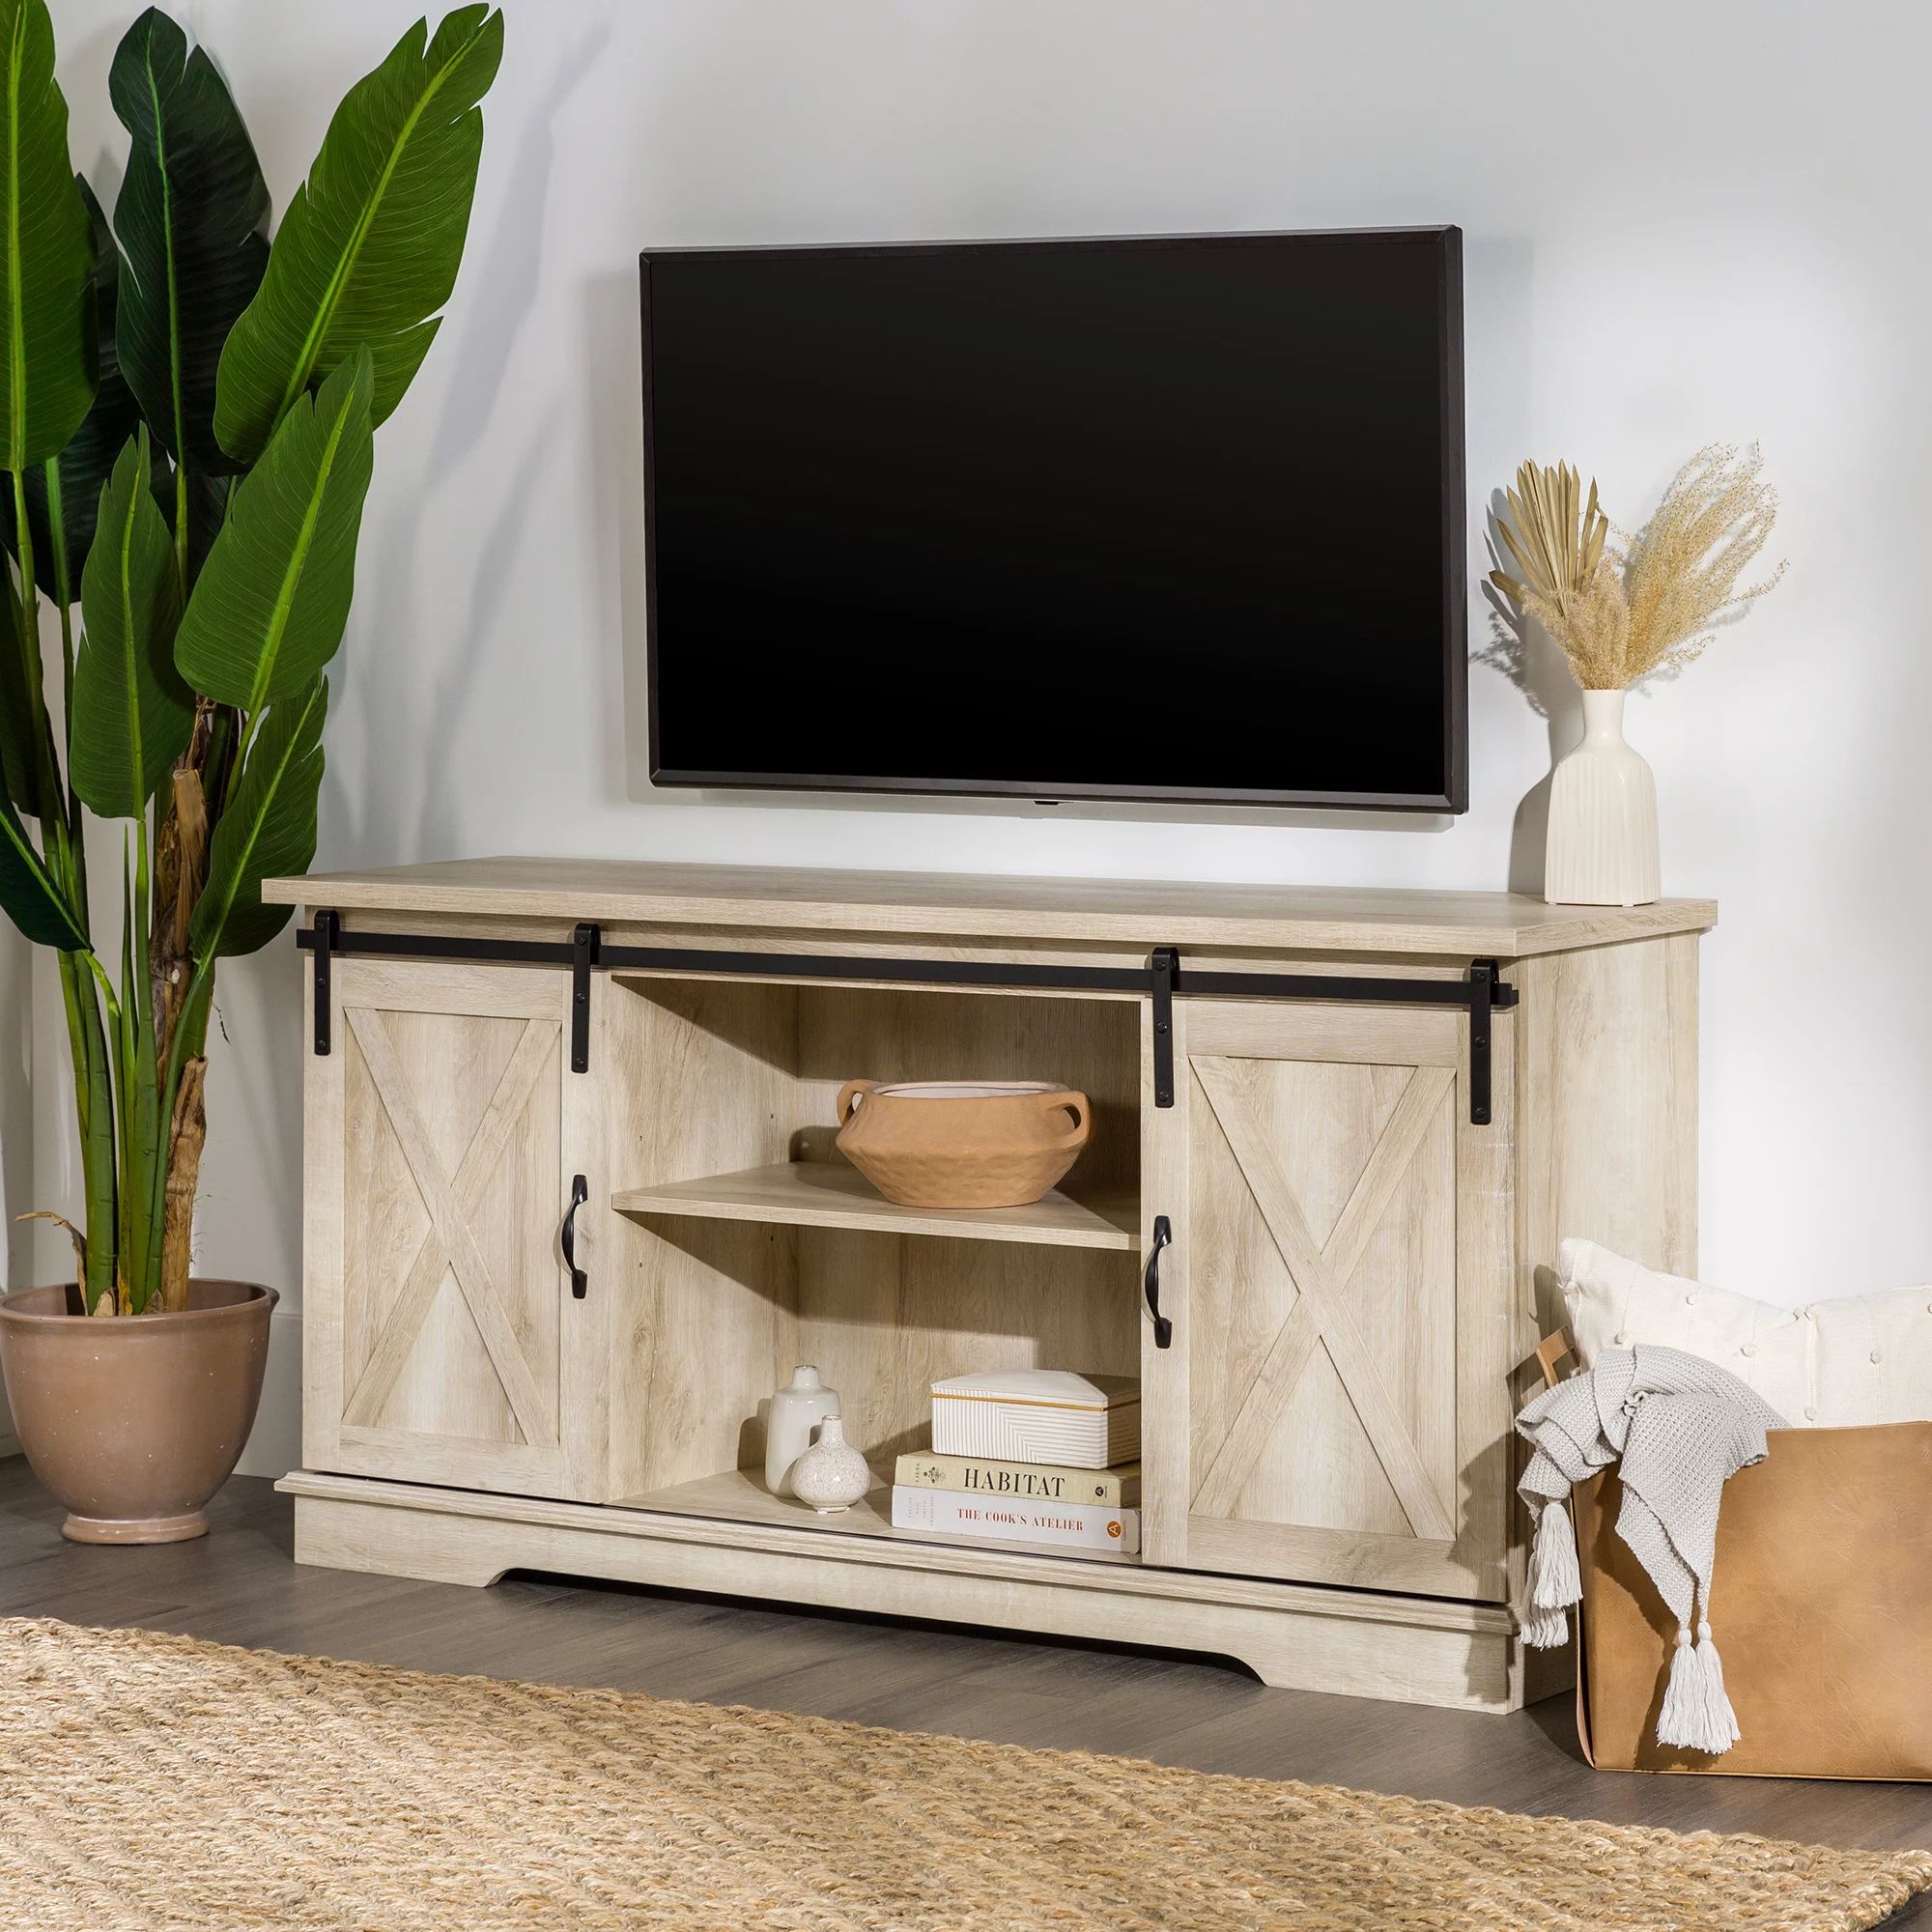 Woven Paths Sliding Farmhouse Barn Door TV Stand for TVs up to 65", White Oak | Walmart (US)